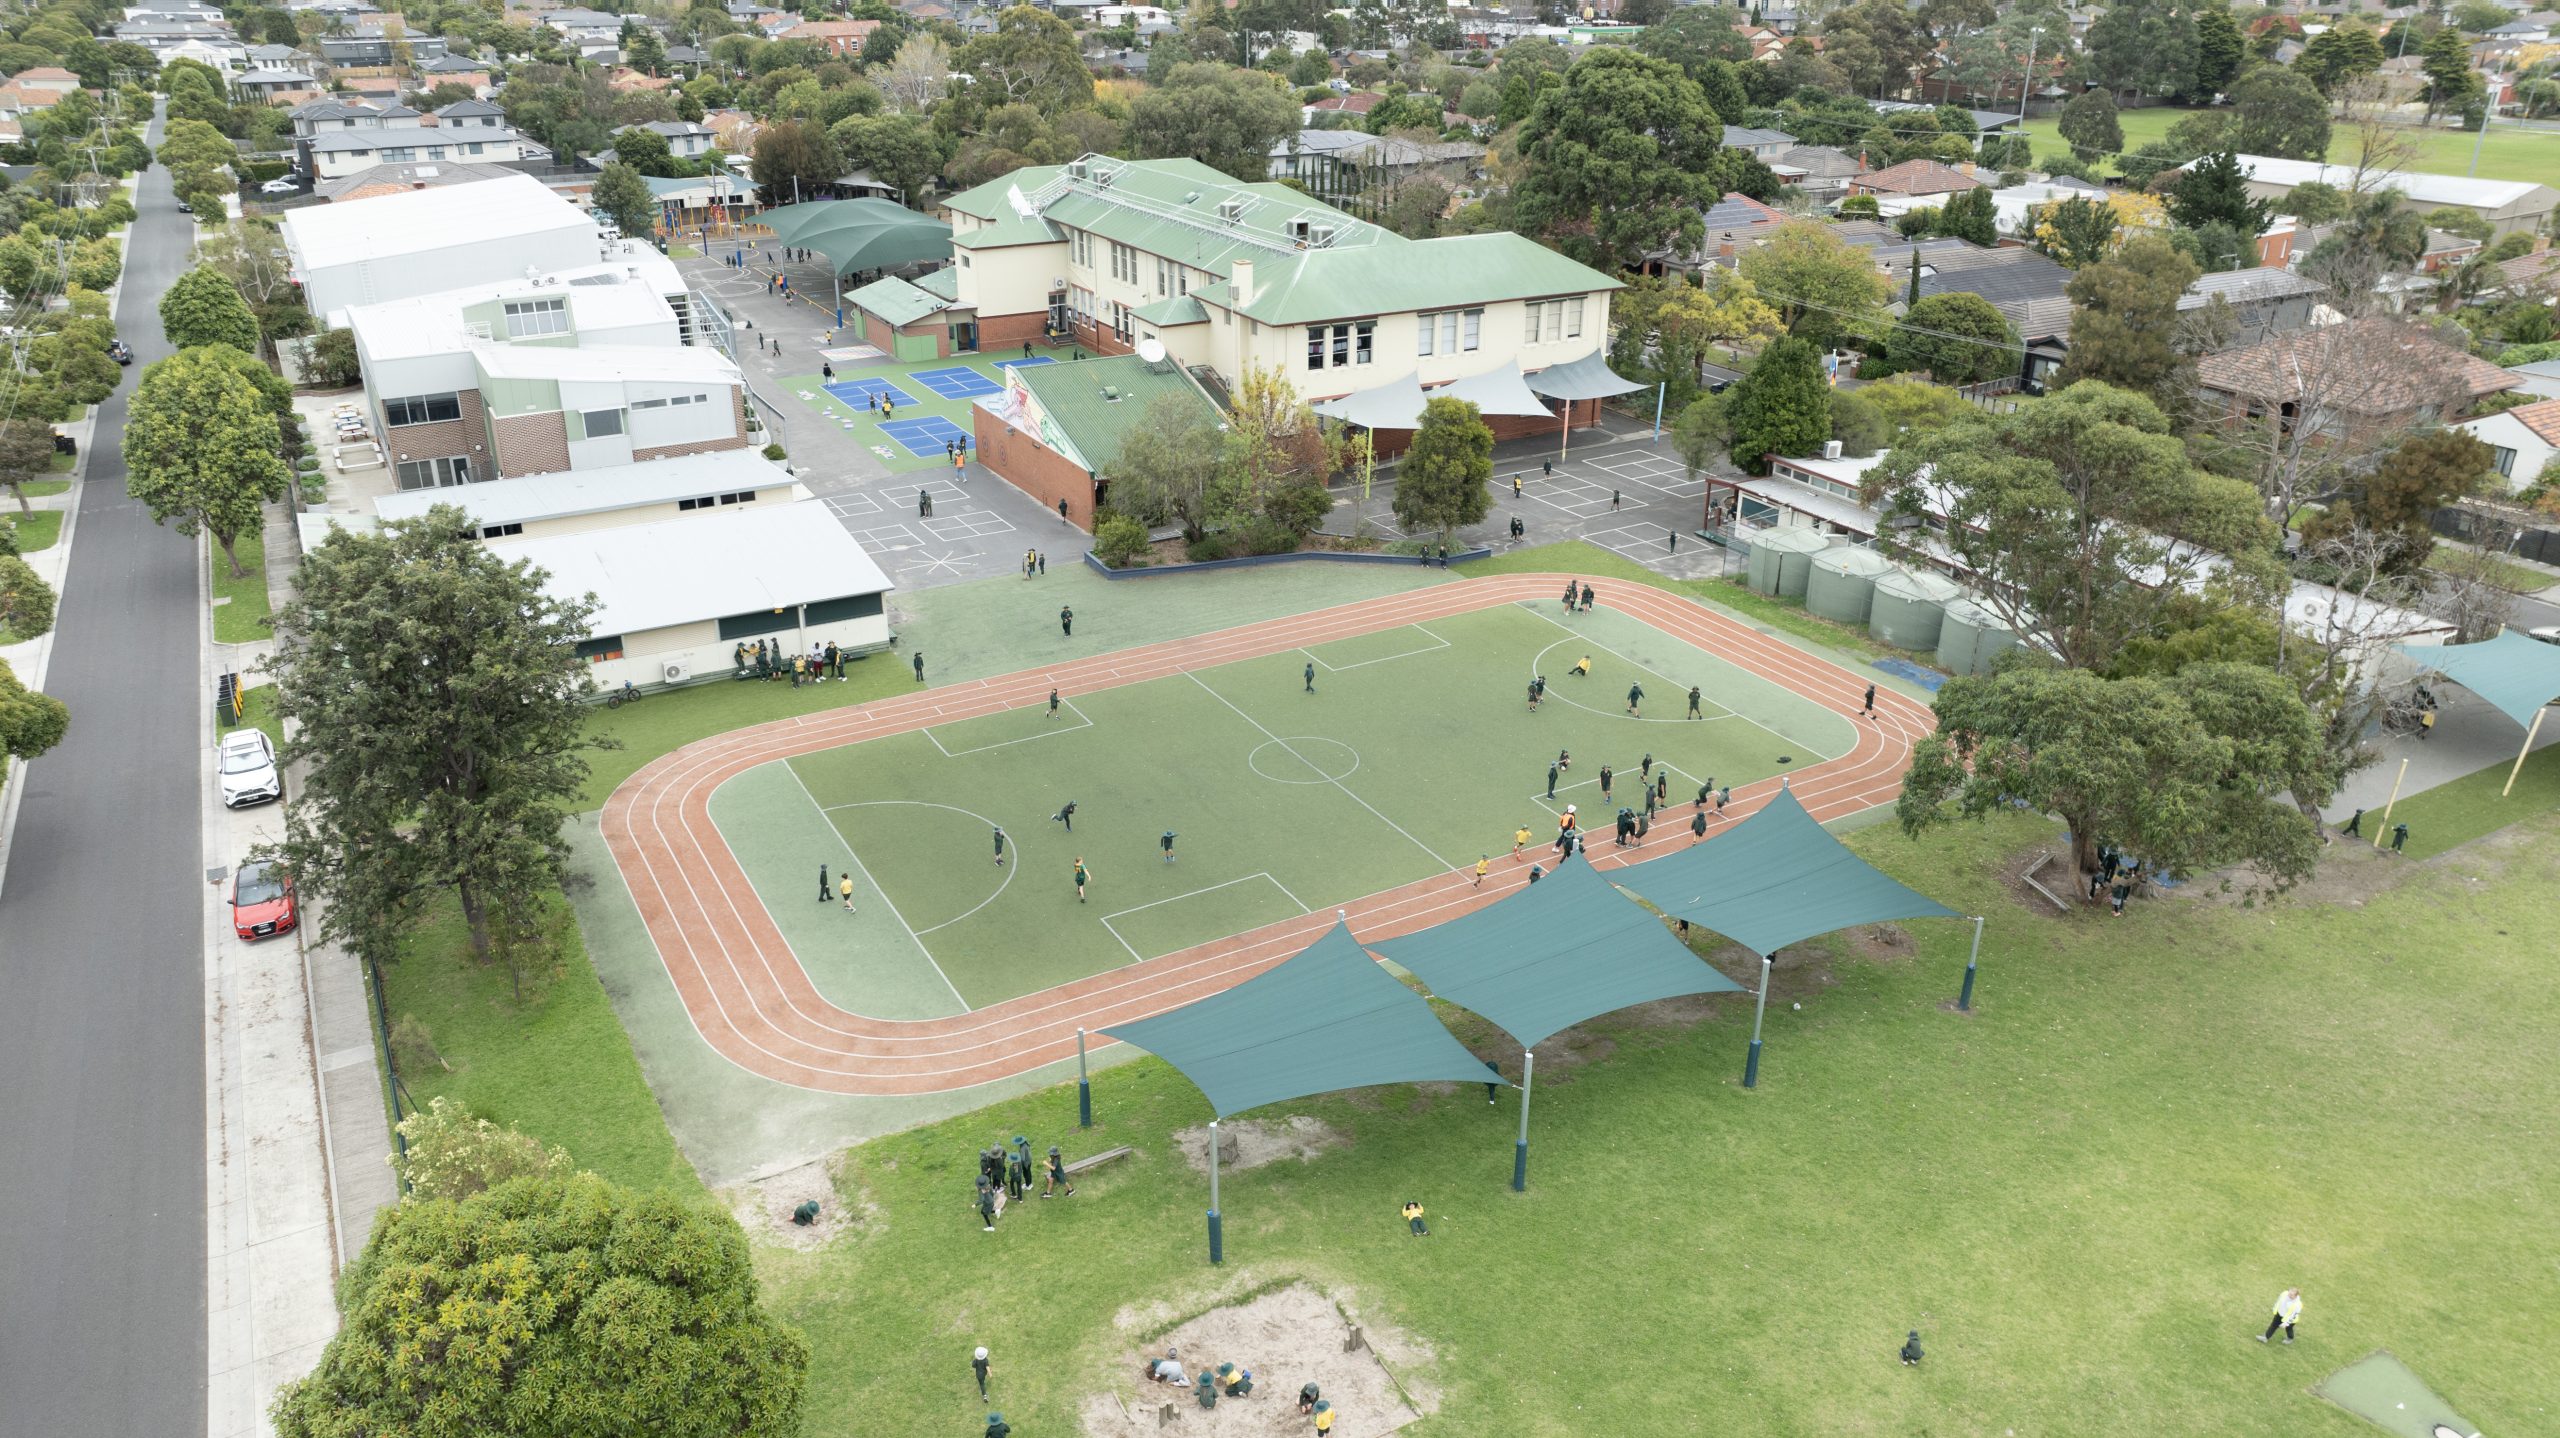 A school running track and soccer pitch